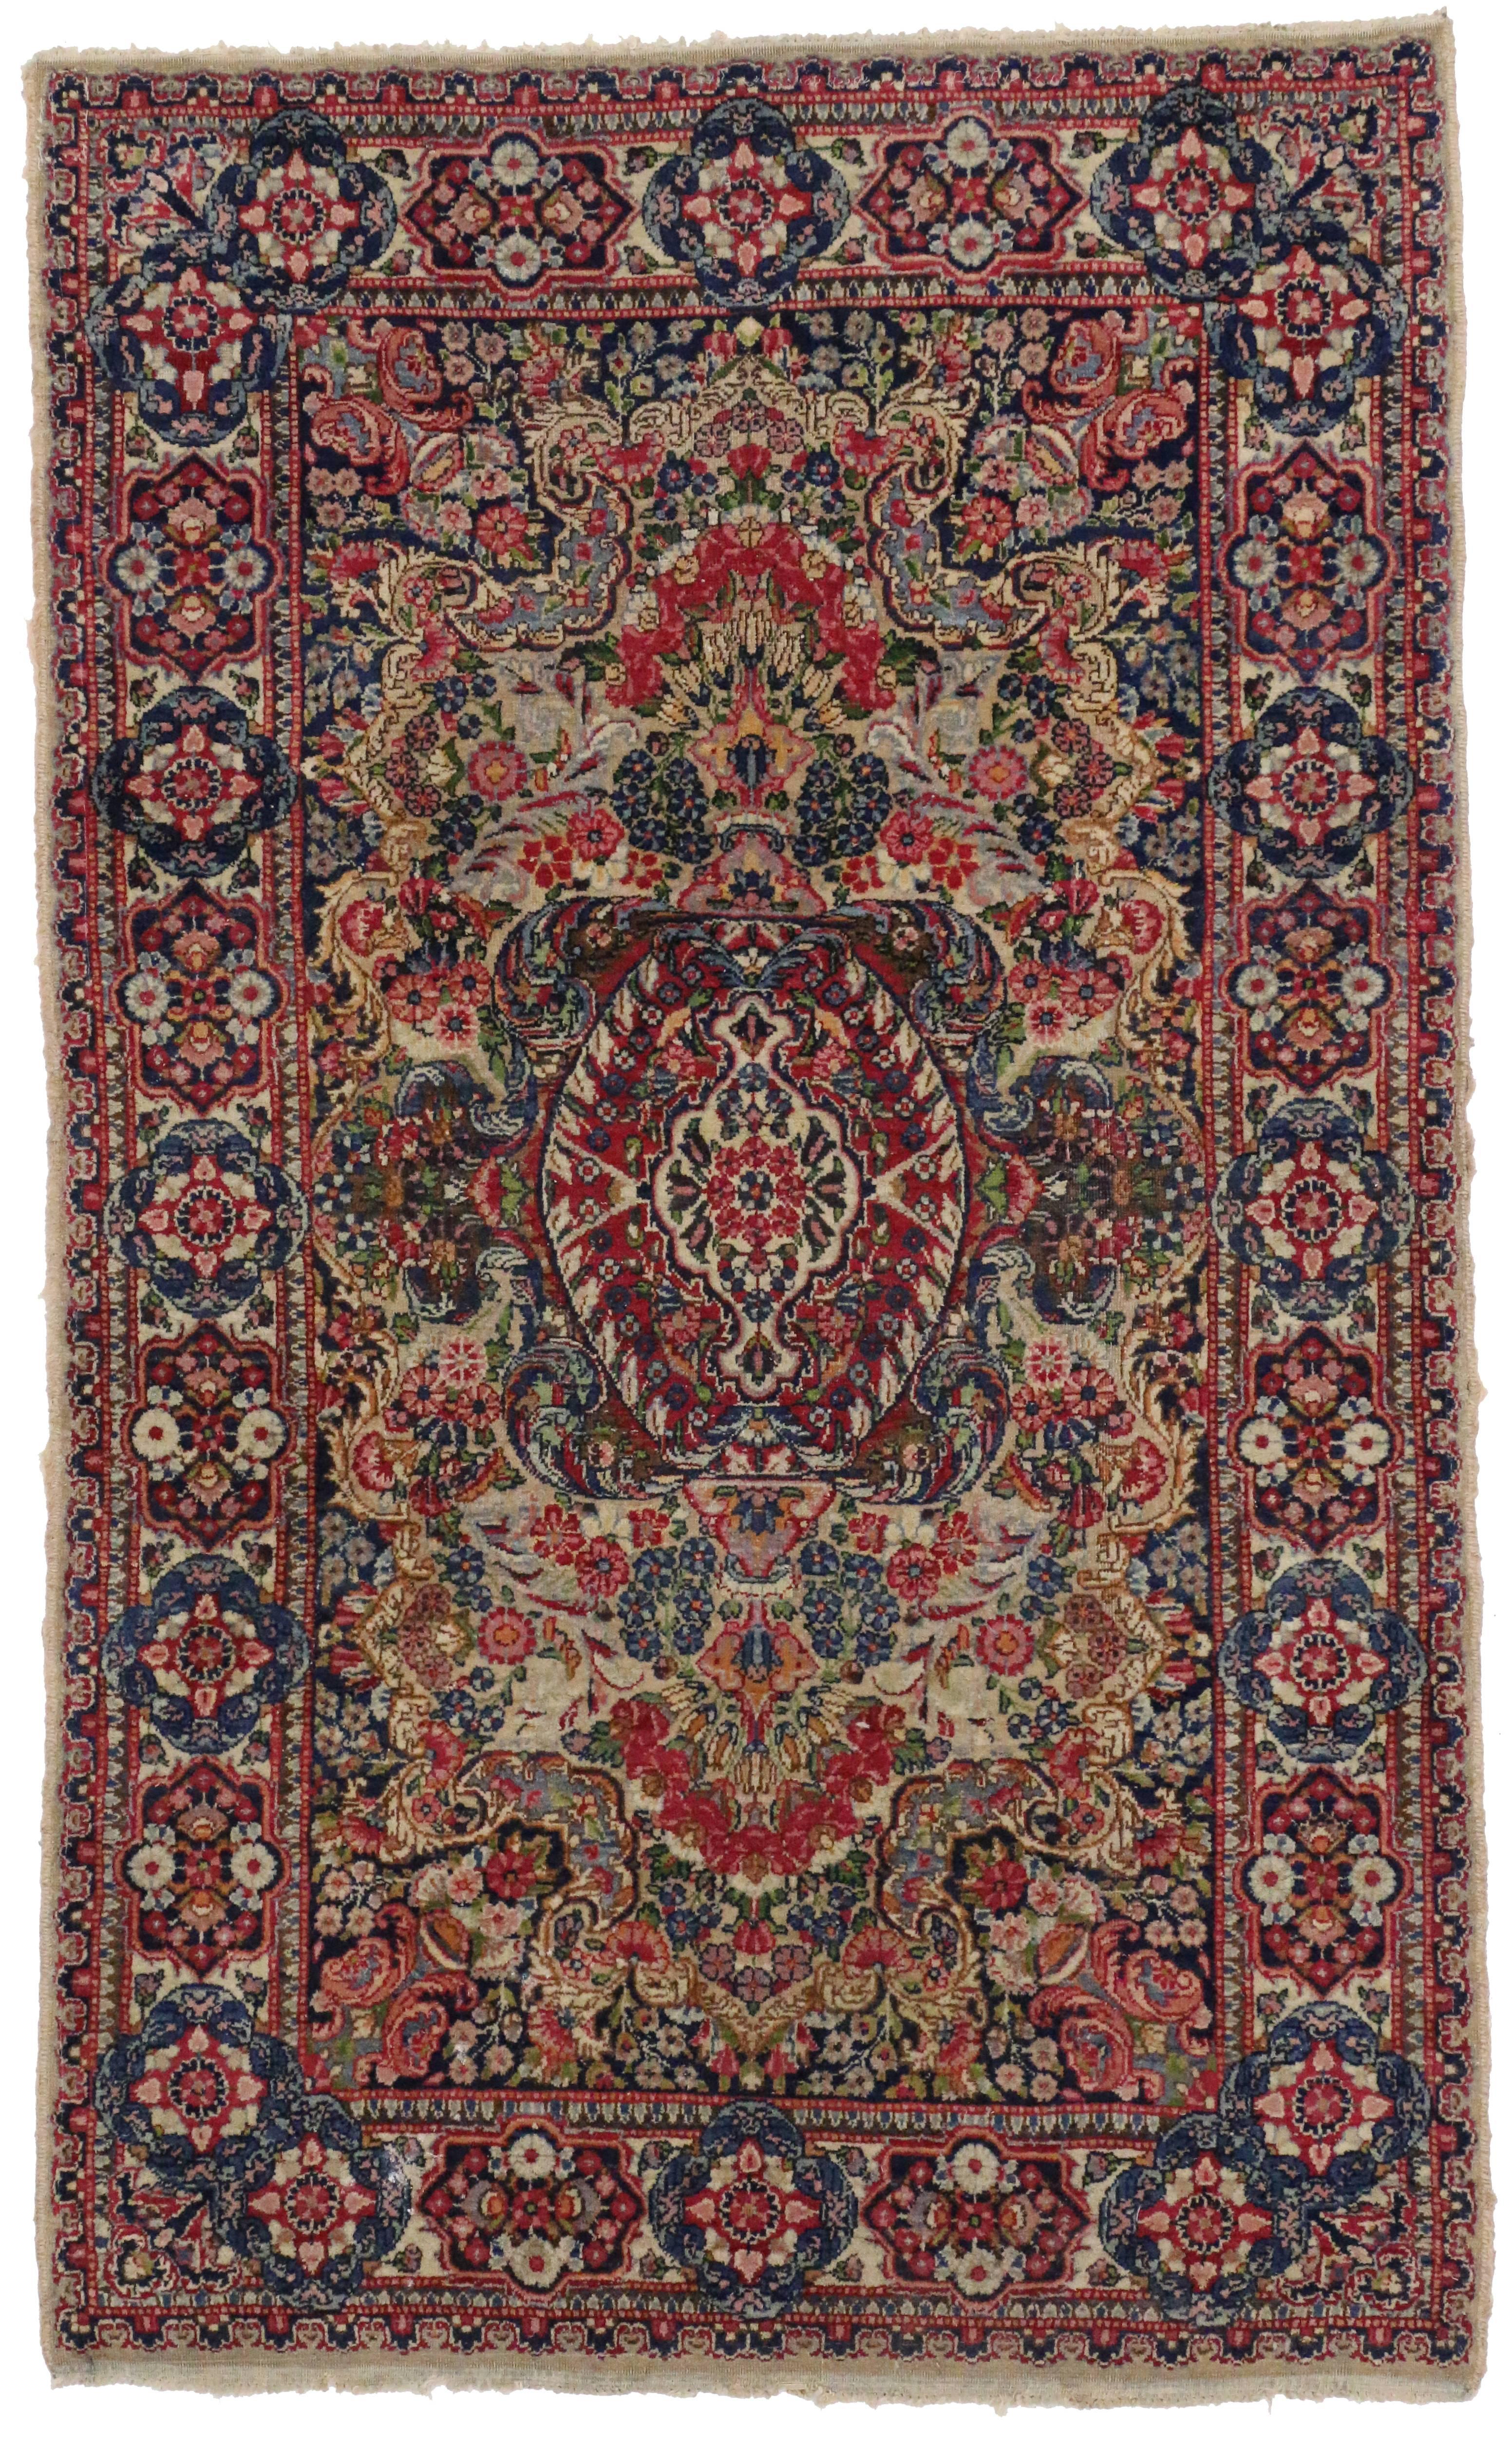 Wool Antique Persian Kerman Rug with French Rococo Style, Small Persian Accent Rug